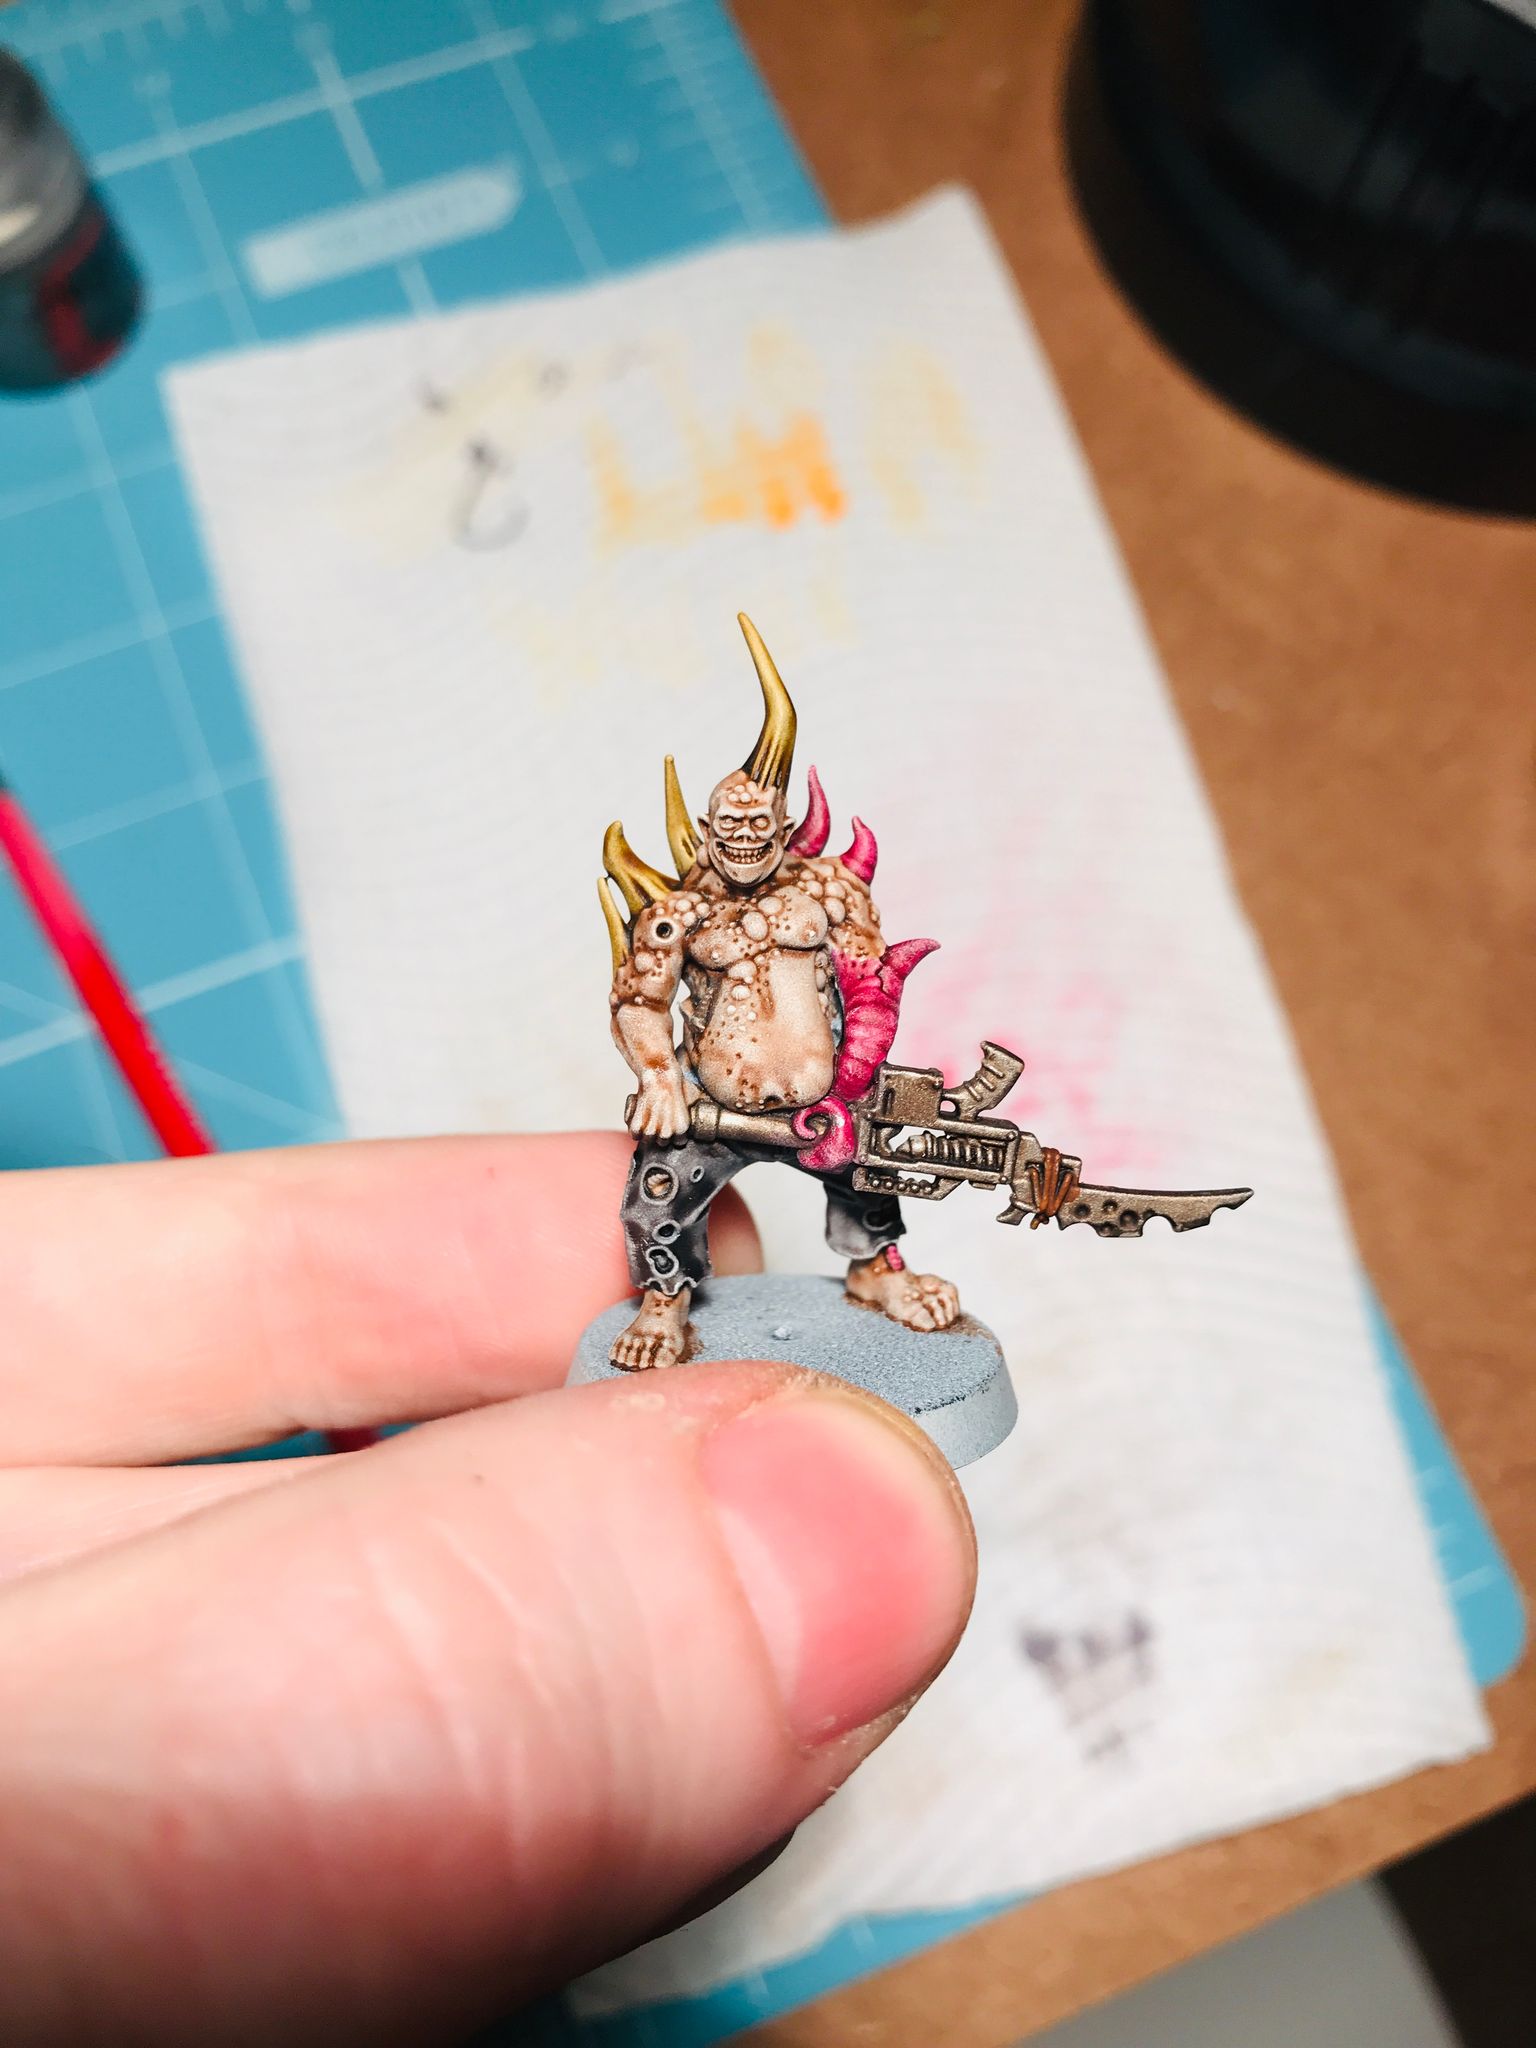 A photo of a Nurgle poxwalker miniature, a fleshy bloated demon with large bone spikes coming out of its head and left shoulder. Its right arm is a pink tentacle, it has the ripped and torn shreds of a pair of dark grey pants, and it's holding a gun  in front of it.